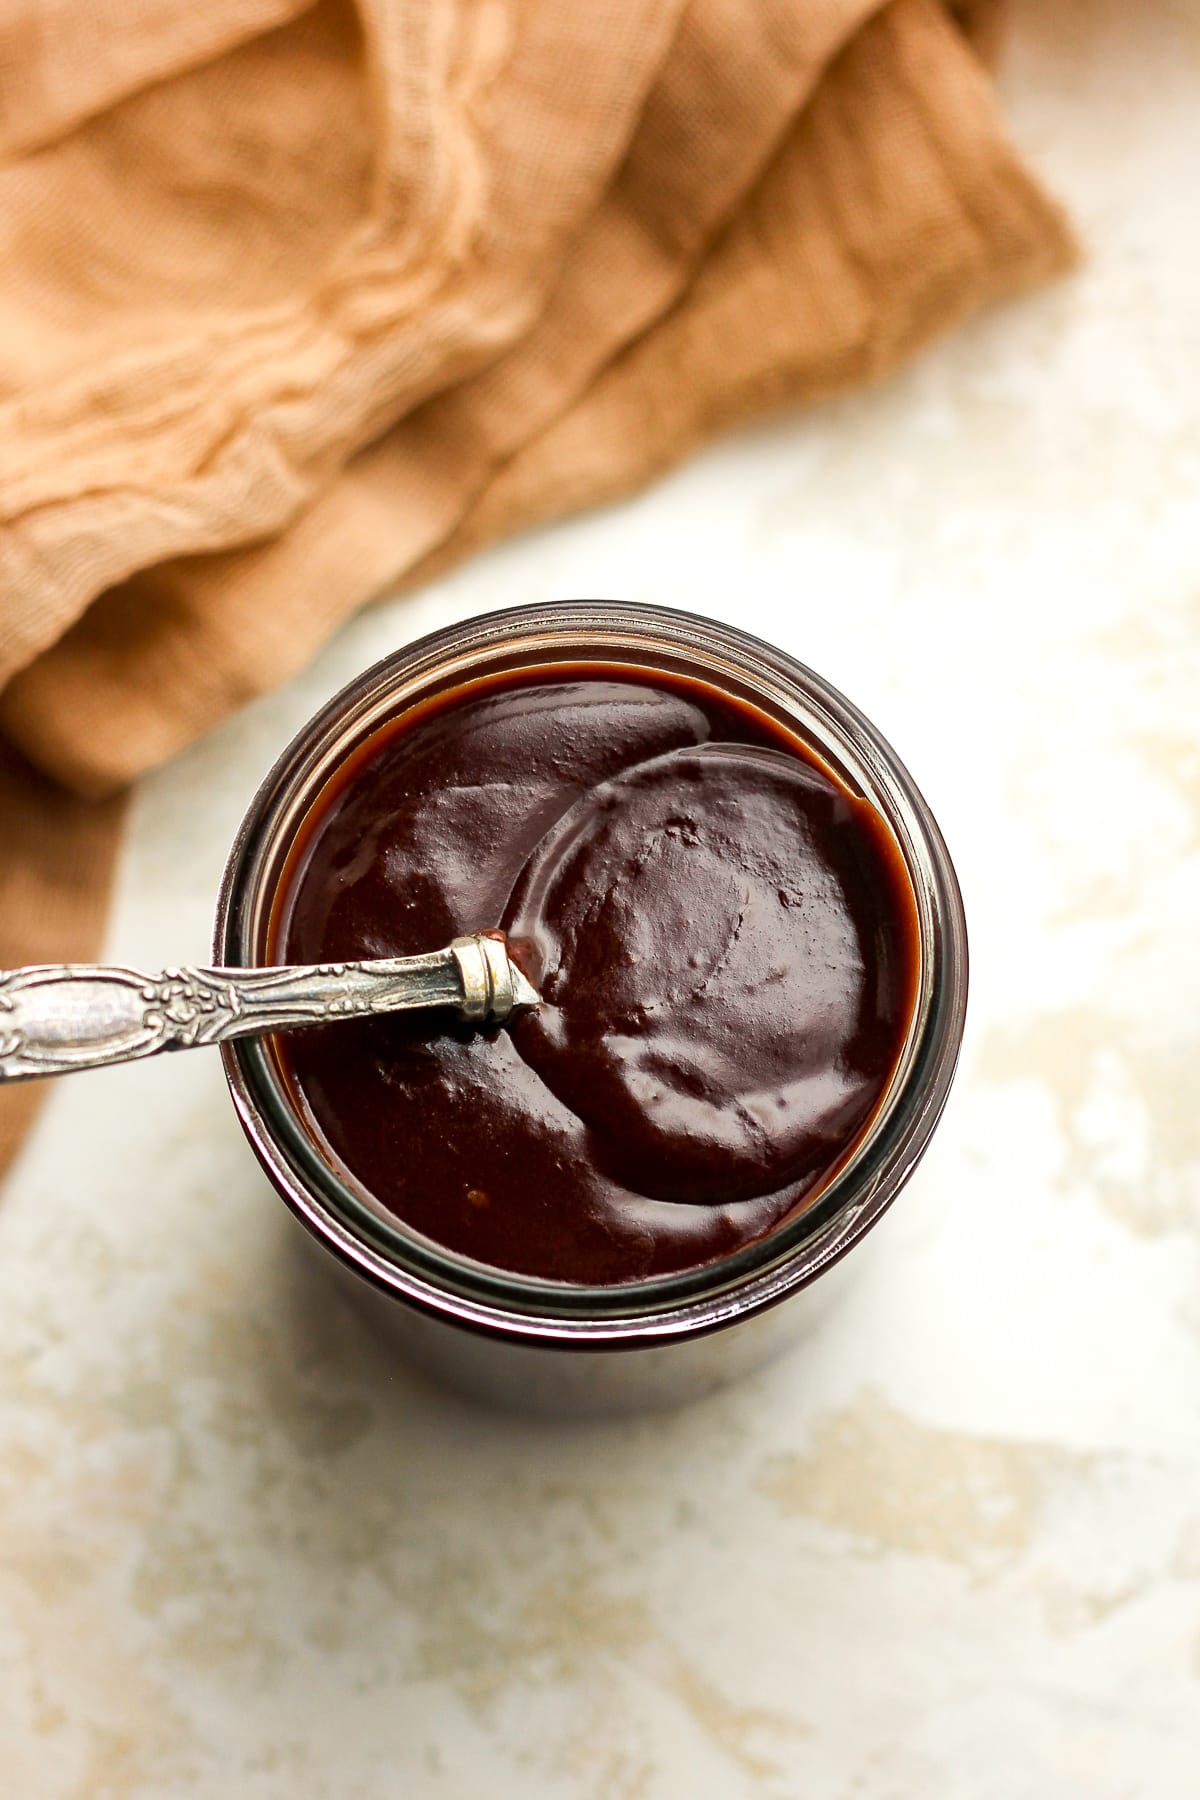 Overhead view of a jar of hot fudge sauce with a tablespoon on top.